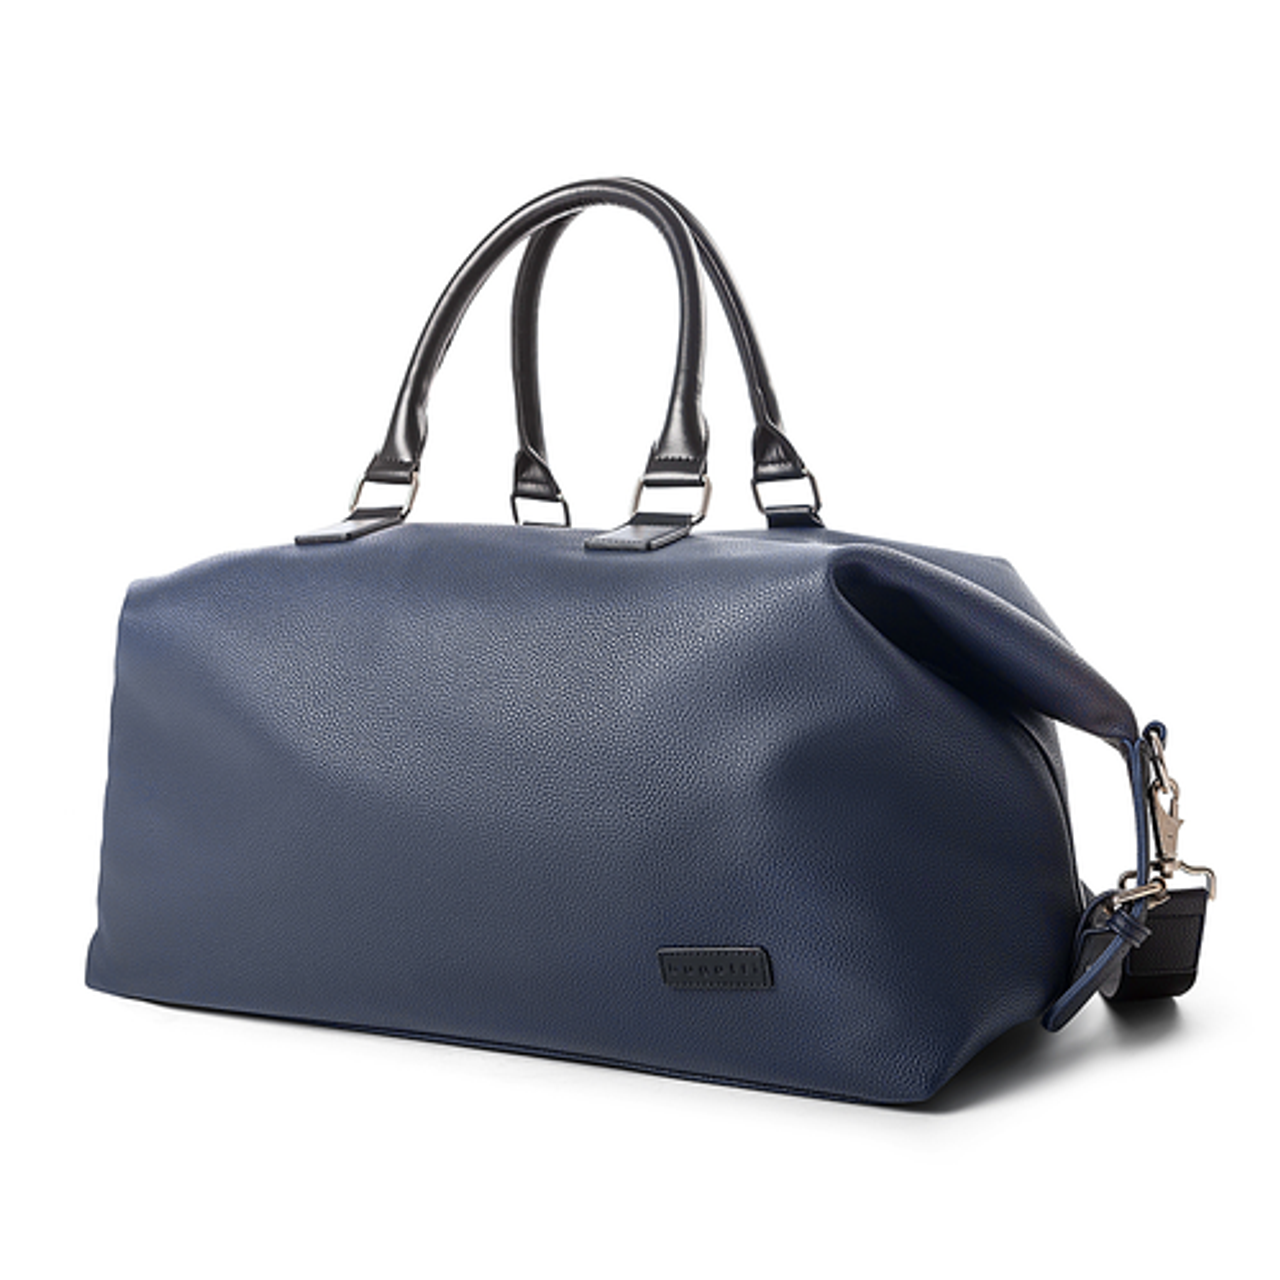 Bugatti - Contrast collection - Duffle bag - Navy